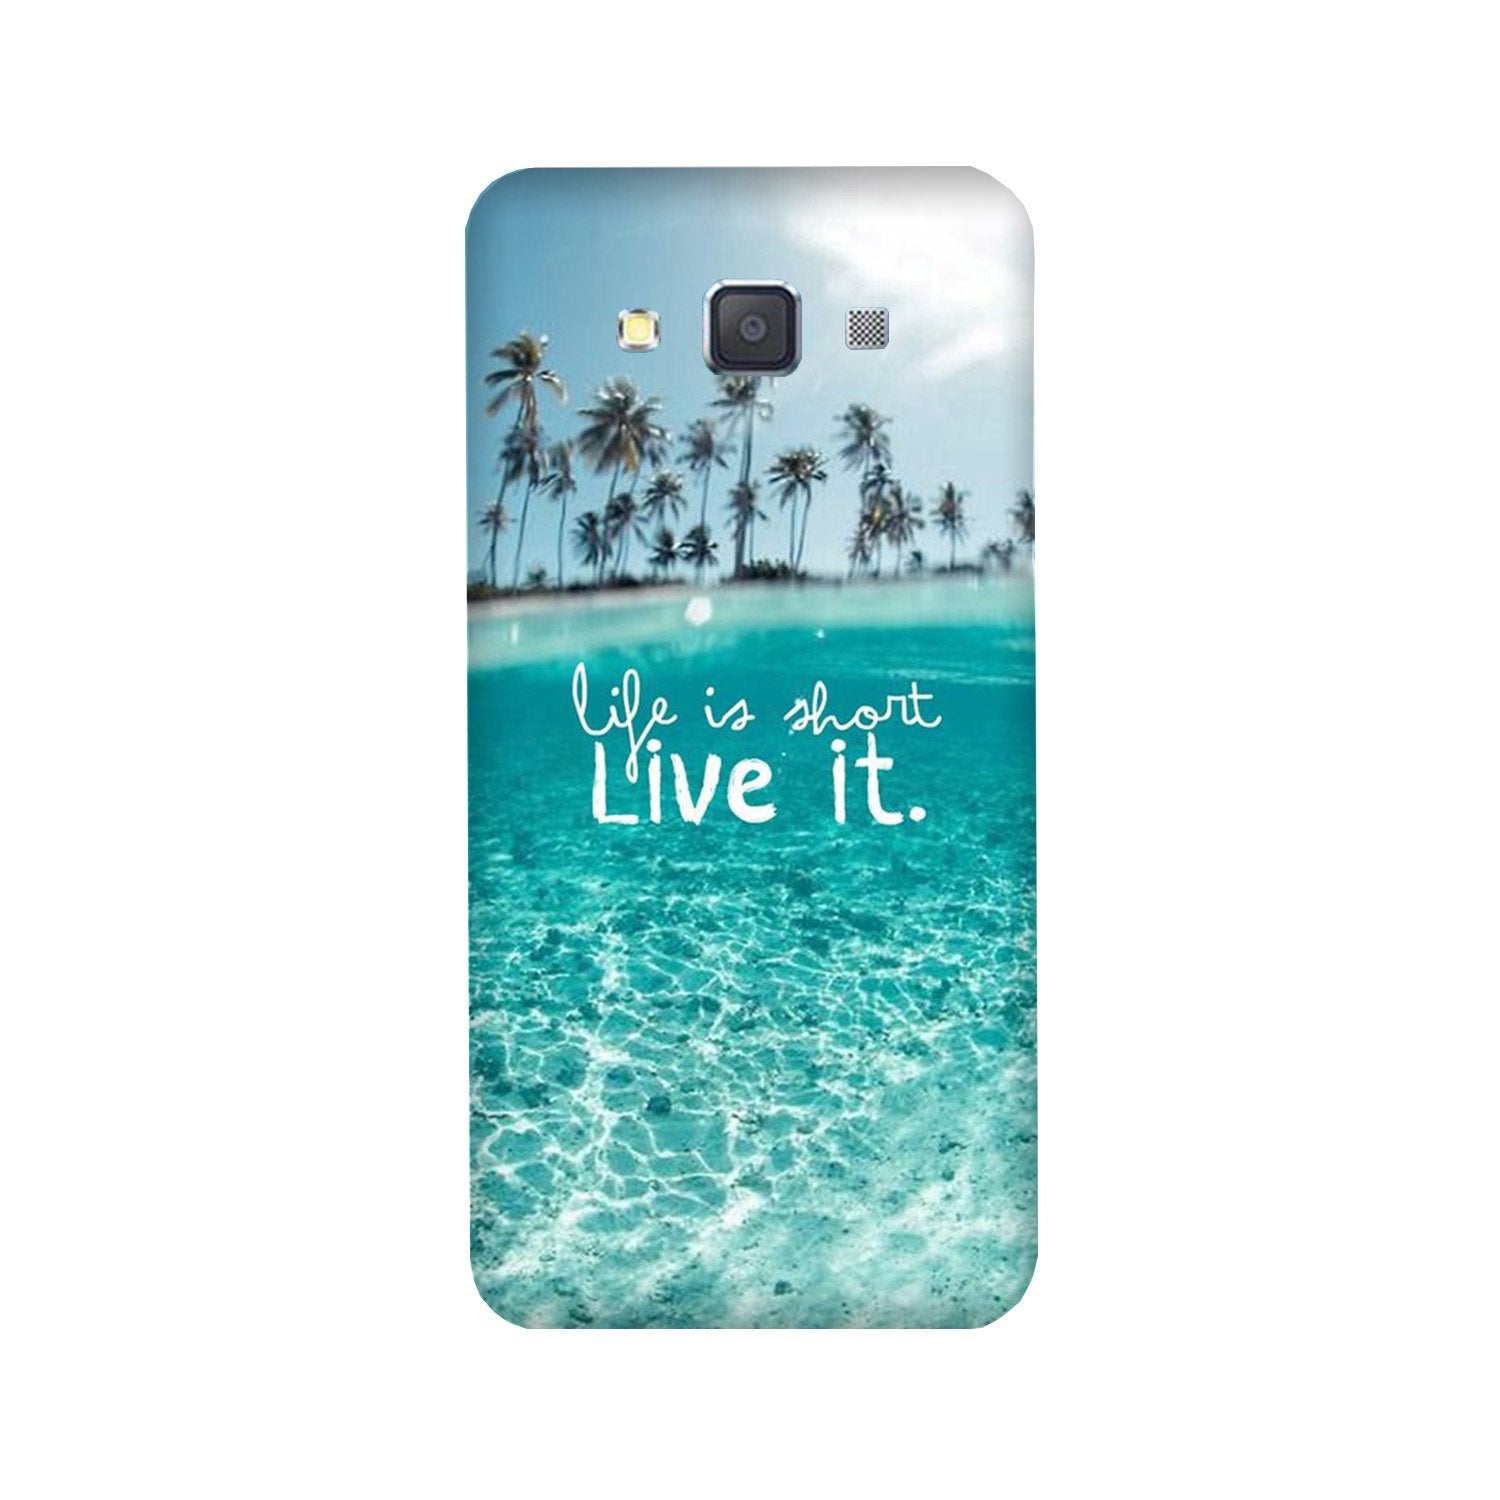 Life is short live it Case for Galaxy A3 (2015)